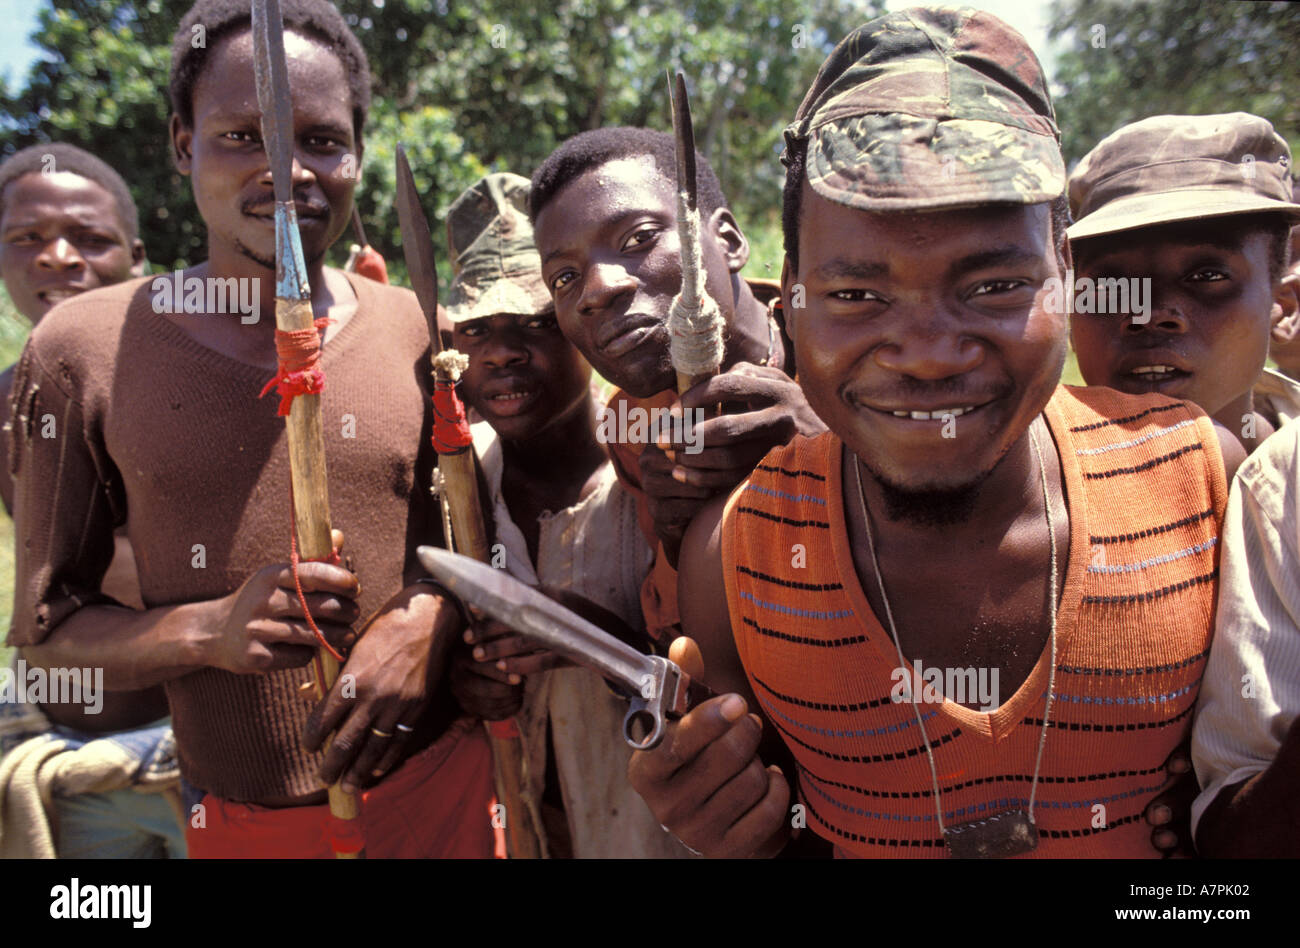 Frightening paramilitary  men with spears and knives call themselves liberators freedom fighters in jungle Mozambique Stock Photo